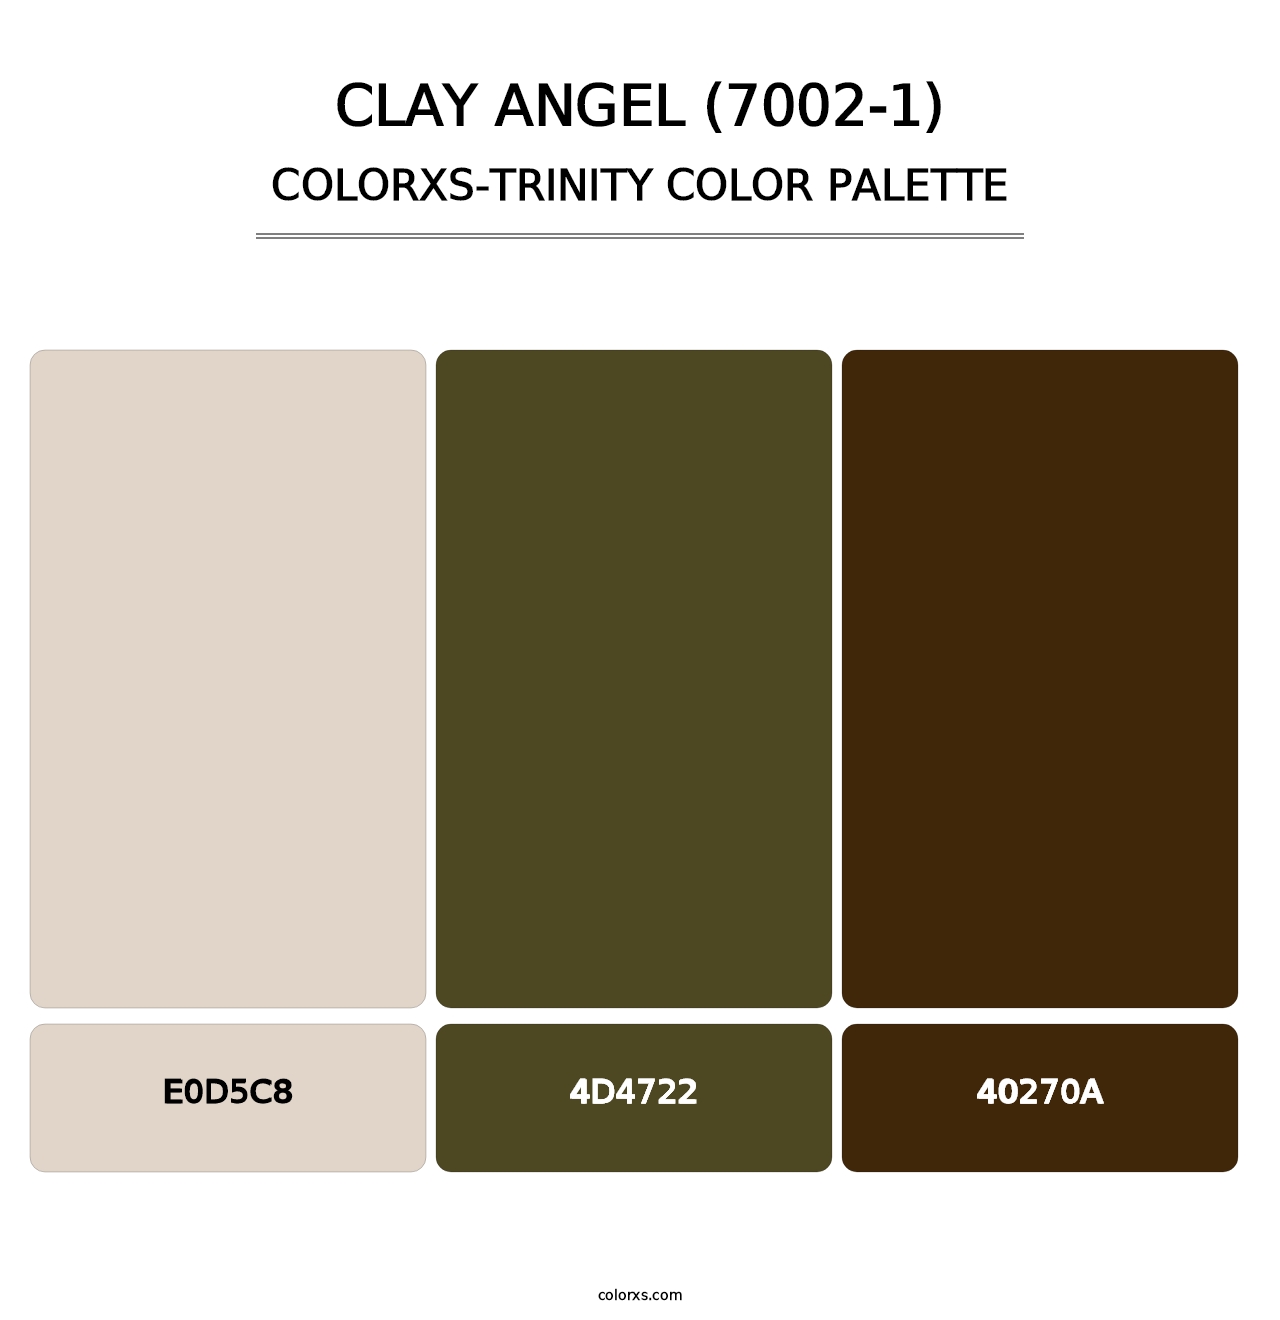 Clay Angel (7002-1) - Colorxs Trinity Palette